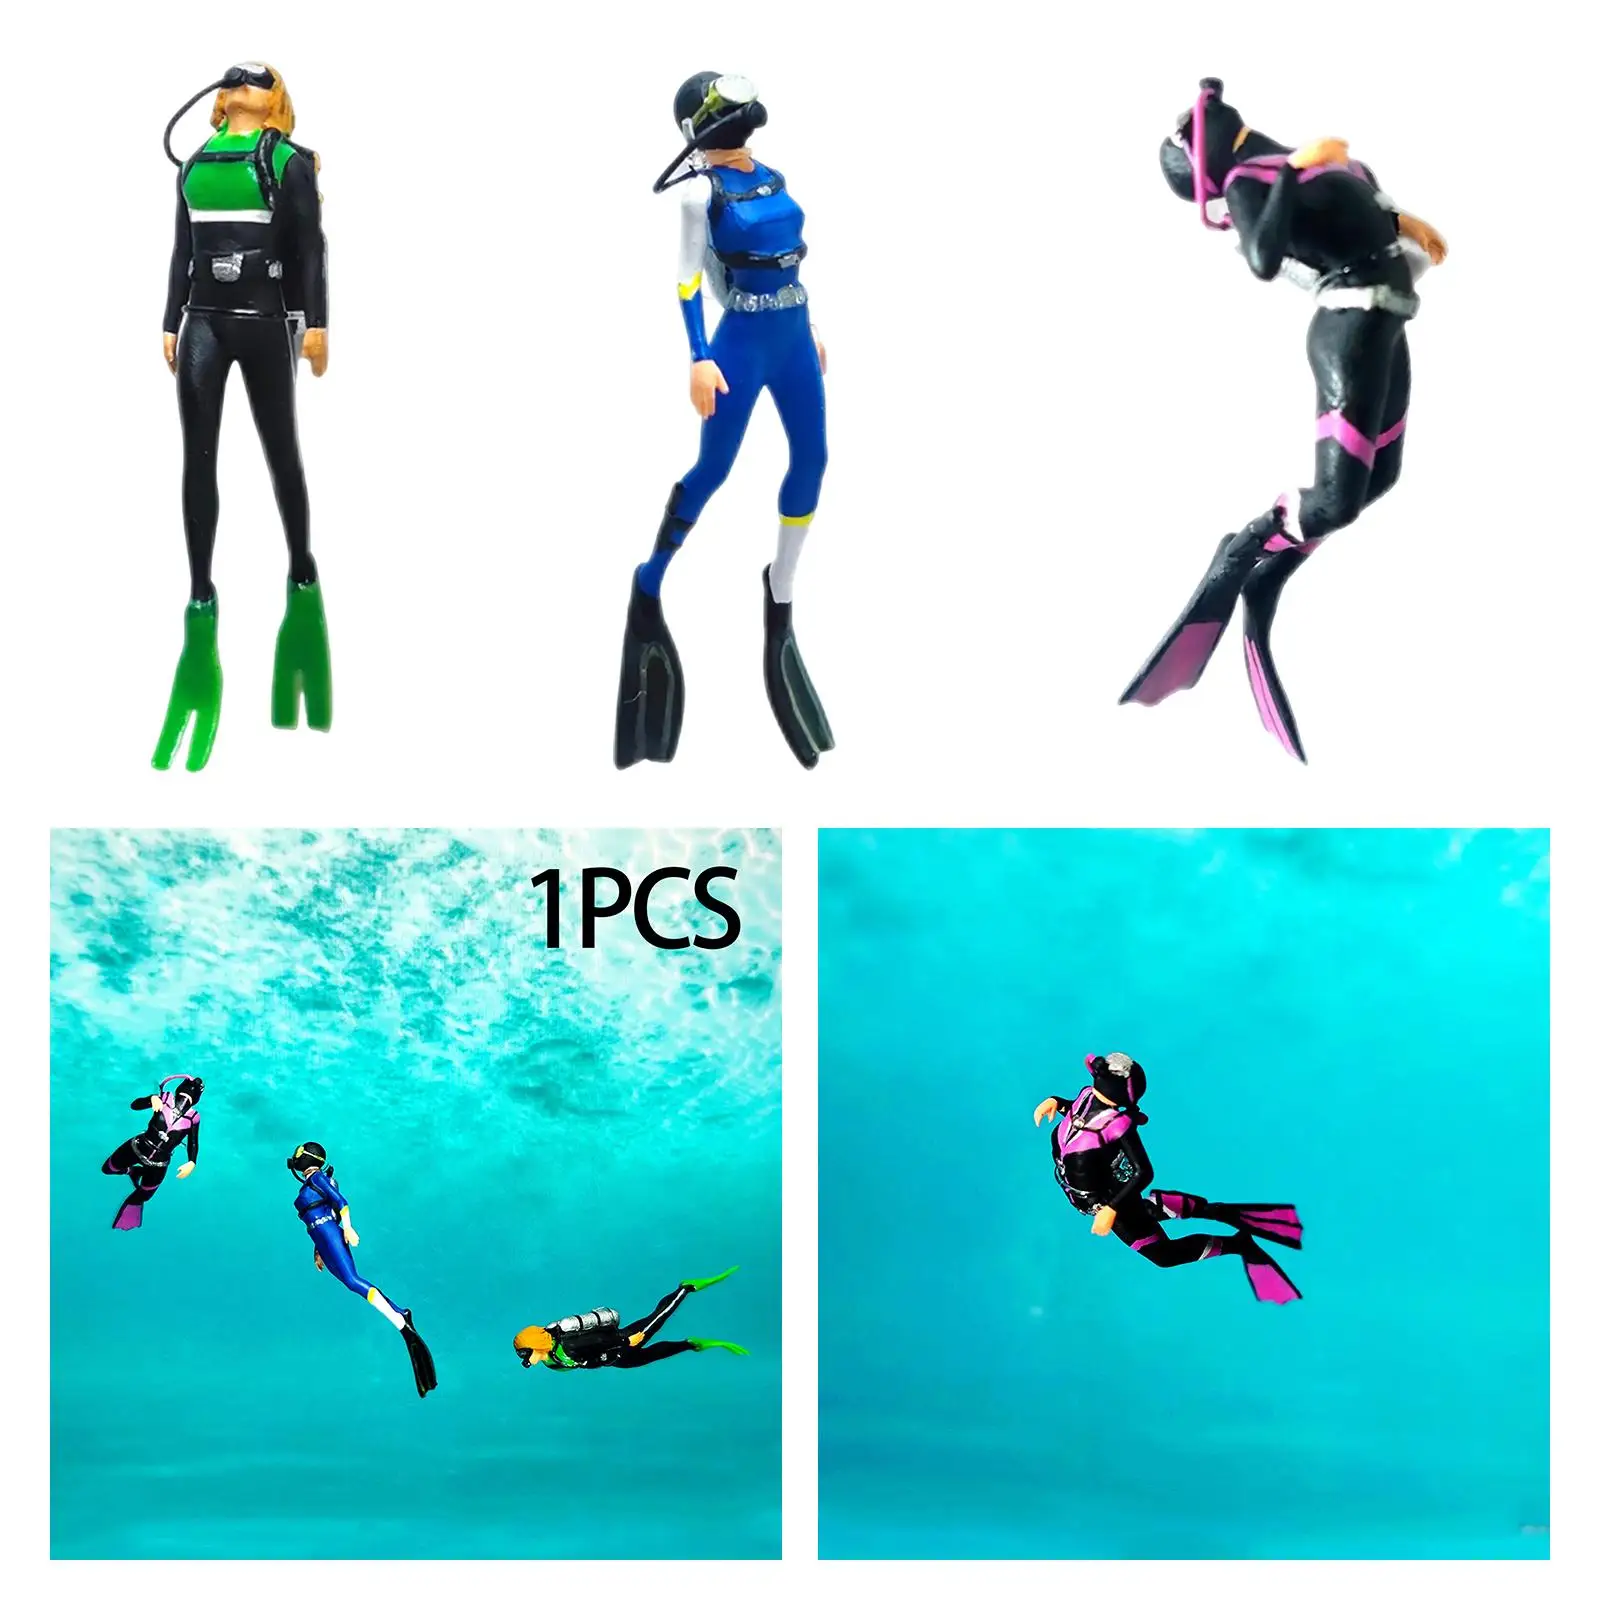 1/64 Action Figurines Miniature Collection Diving Character Model for Photography Props Diorama Scenery Landscape Accessories